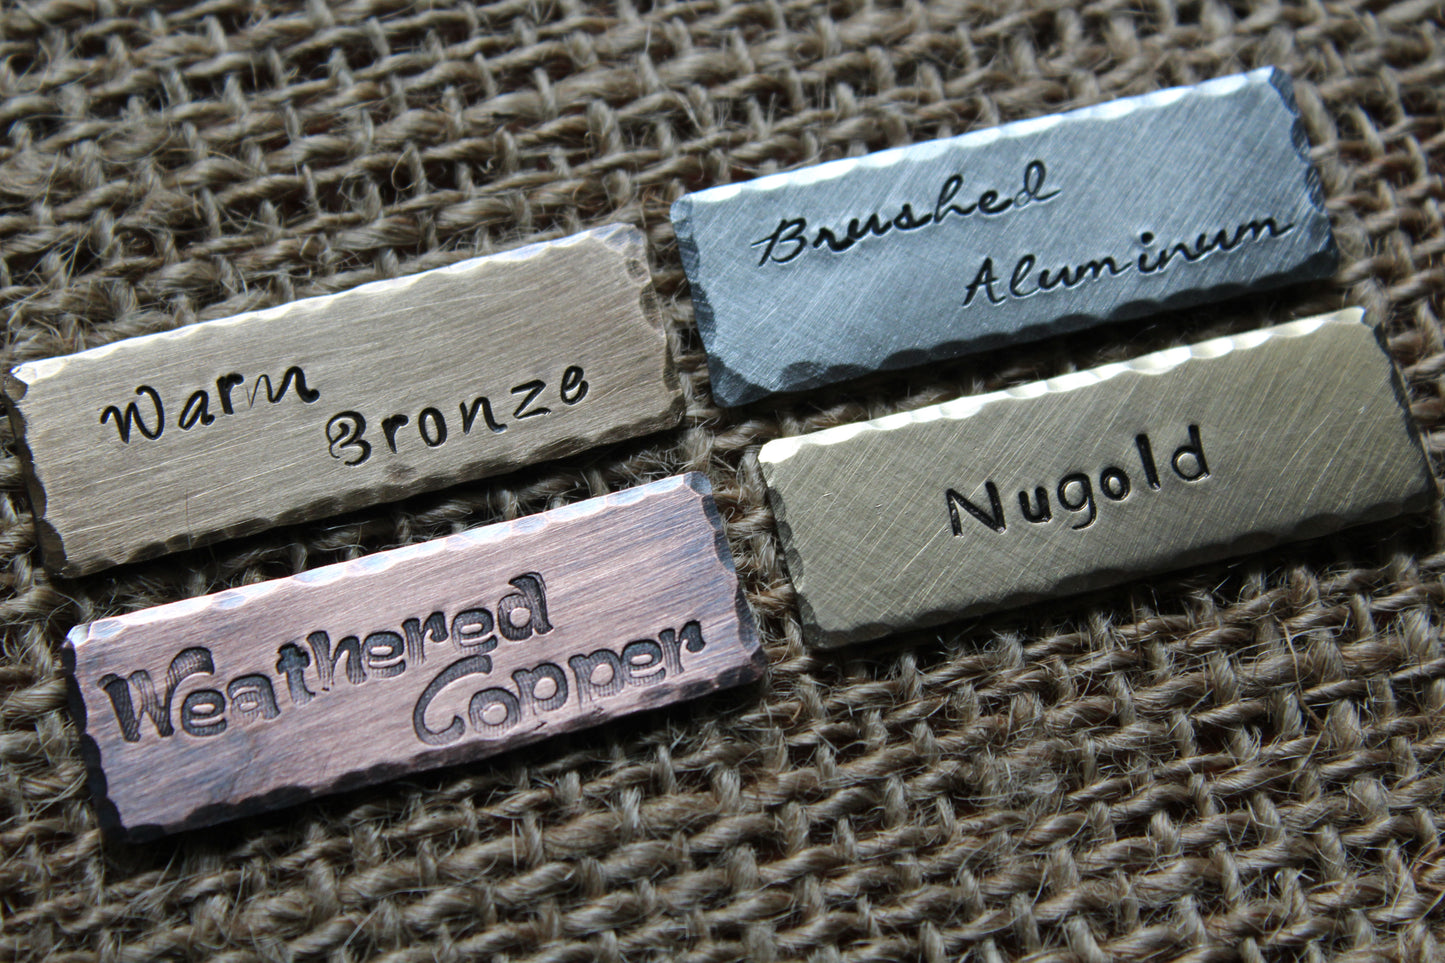 Metal Choices for dog tags